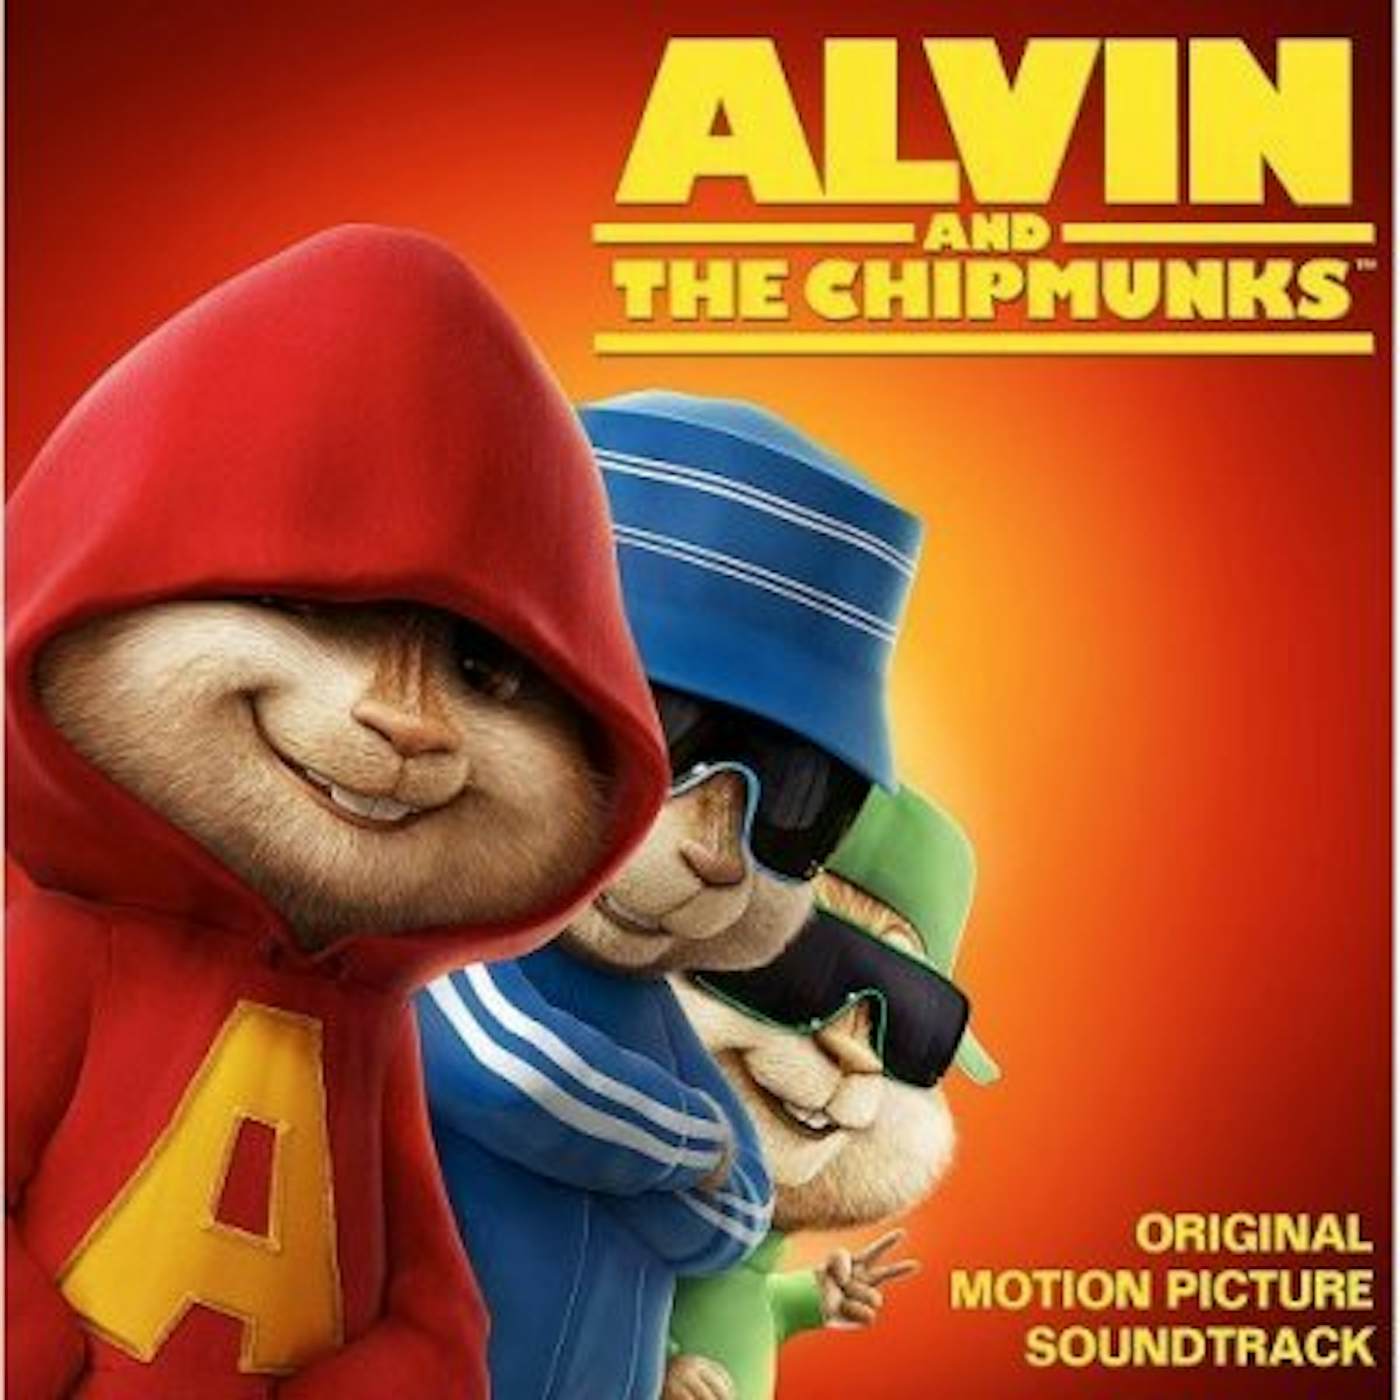 Alvin And The Chipmunks CD